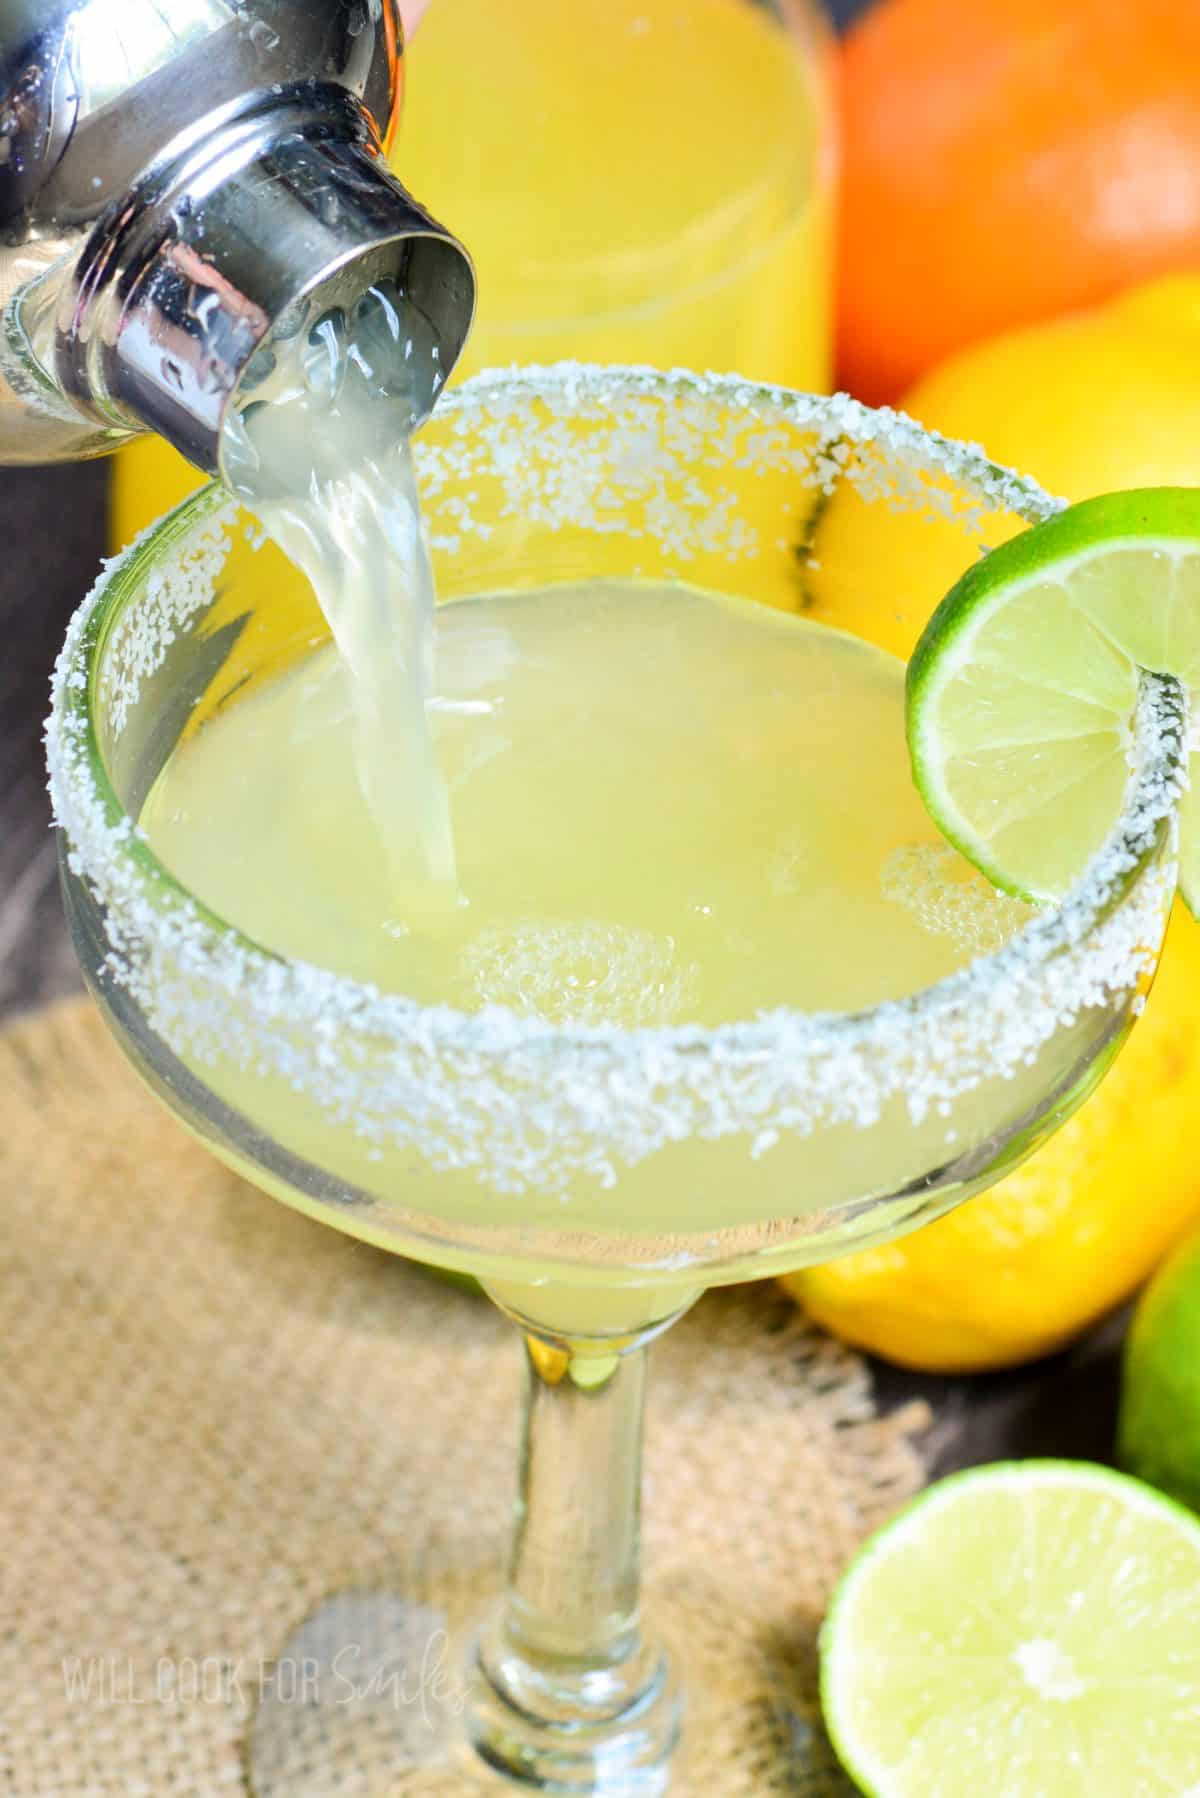 pouring light colored margarita cocktail into glass with salted rim.